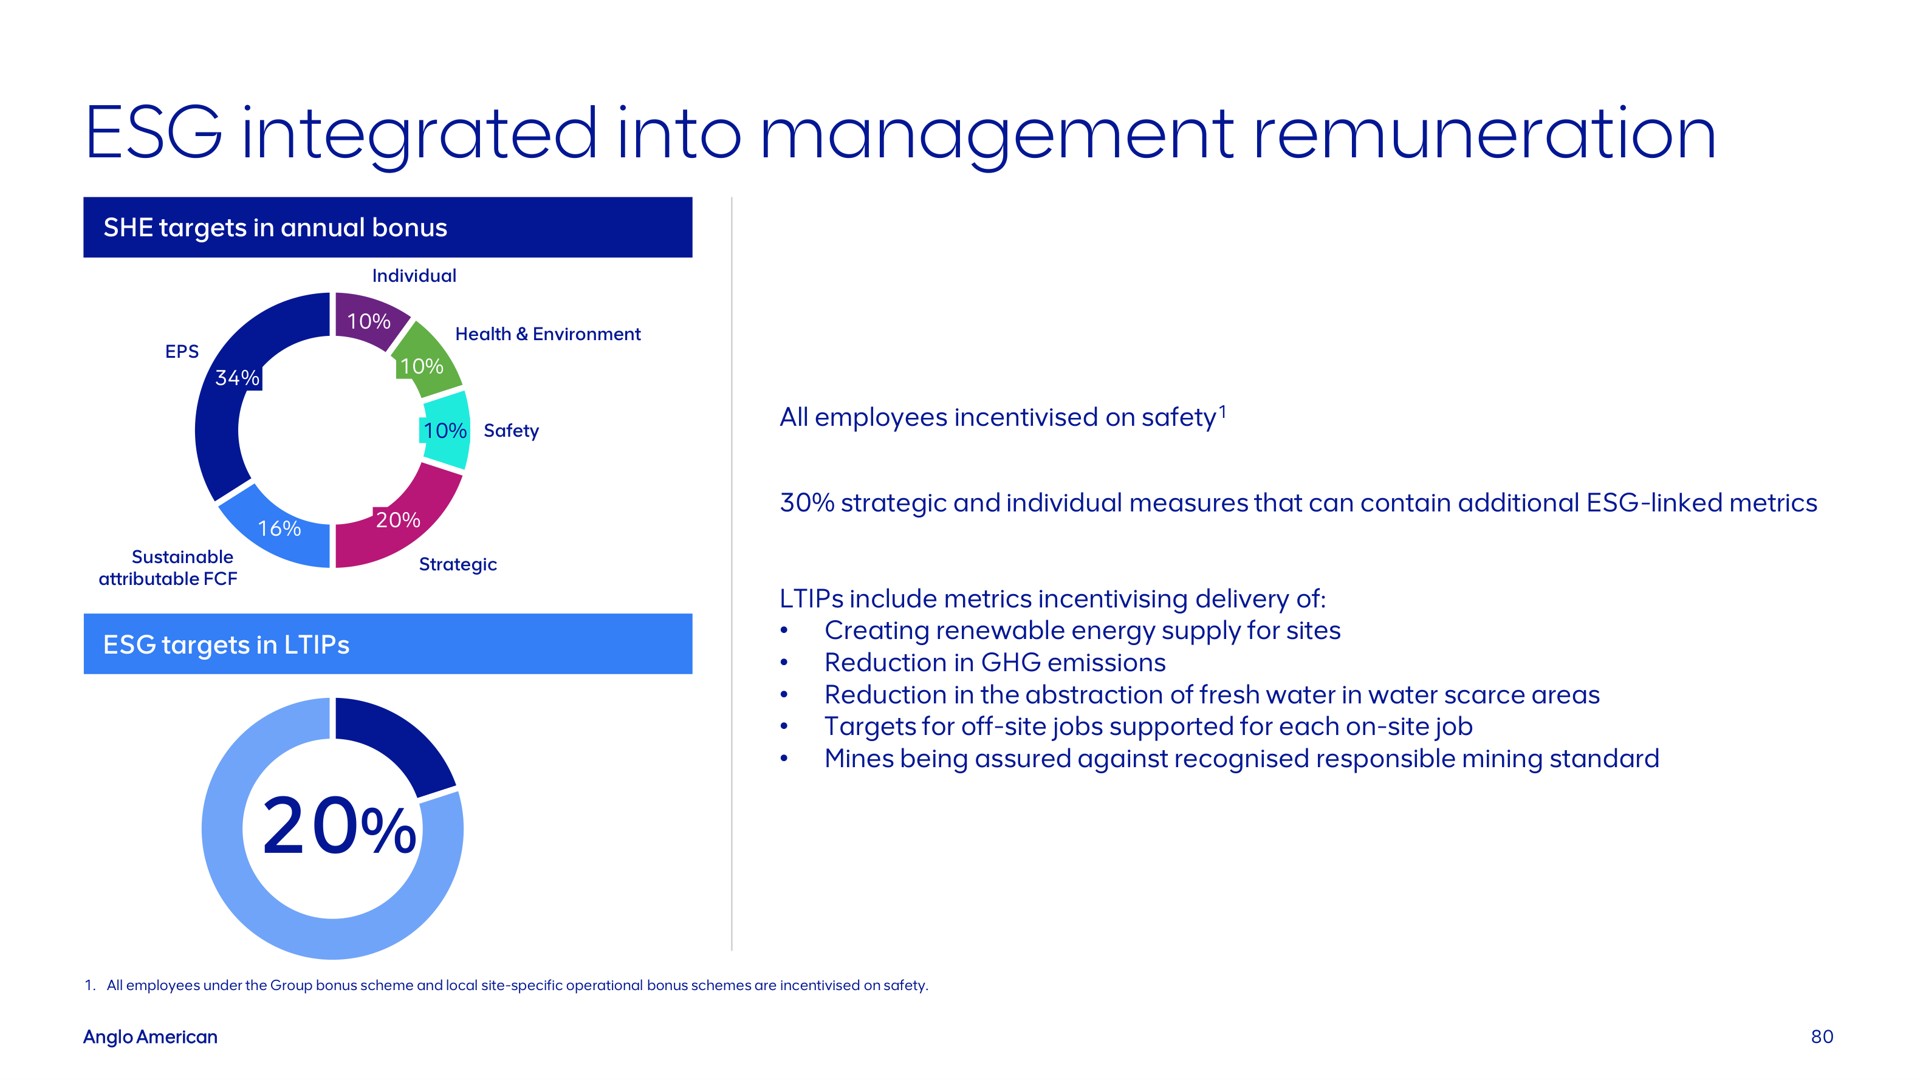 integrated into management remuneration | AngloAmerican